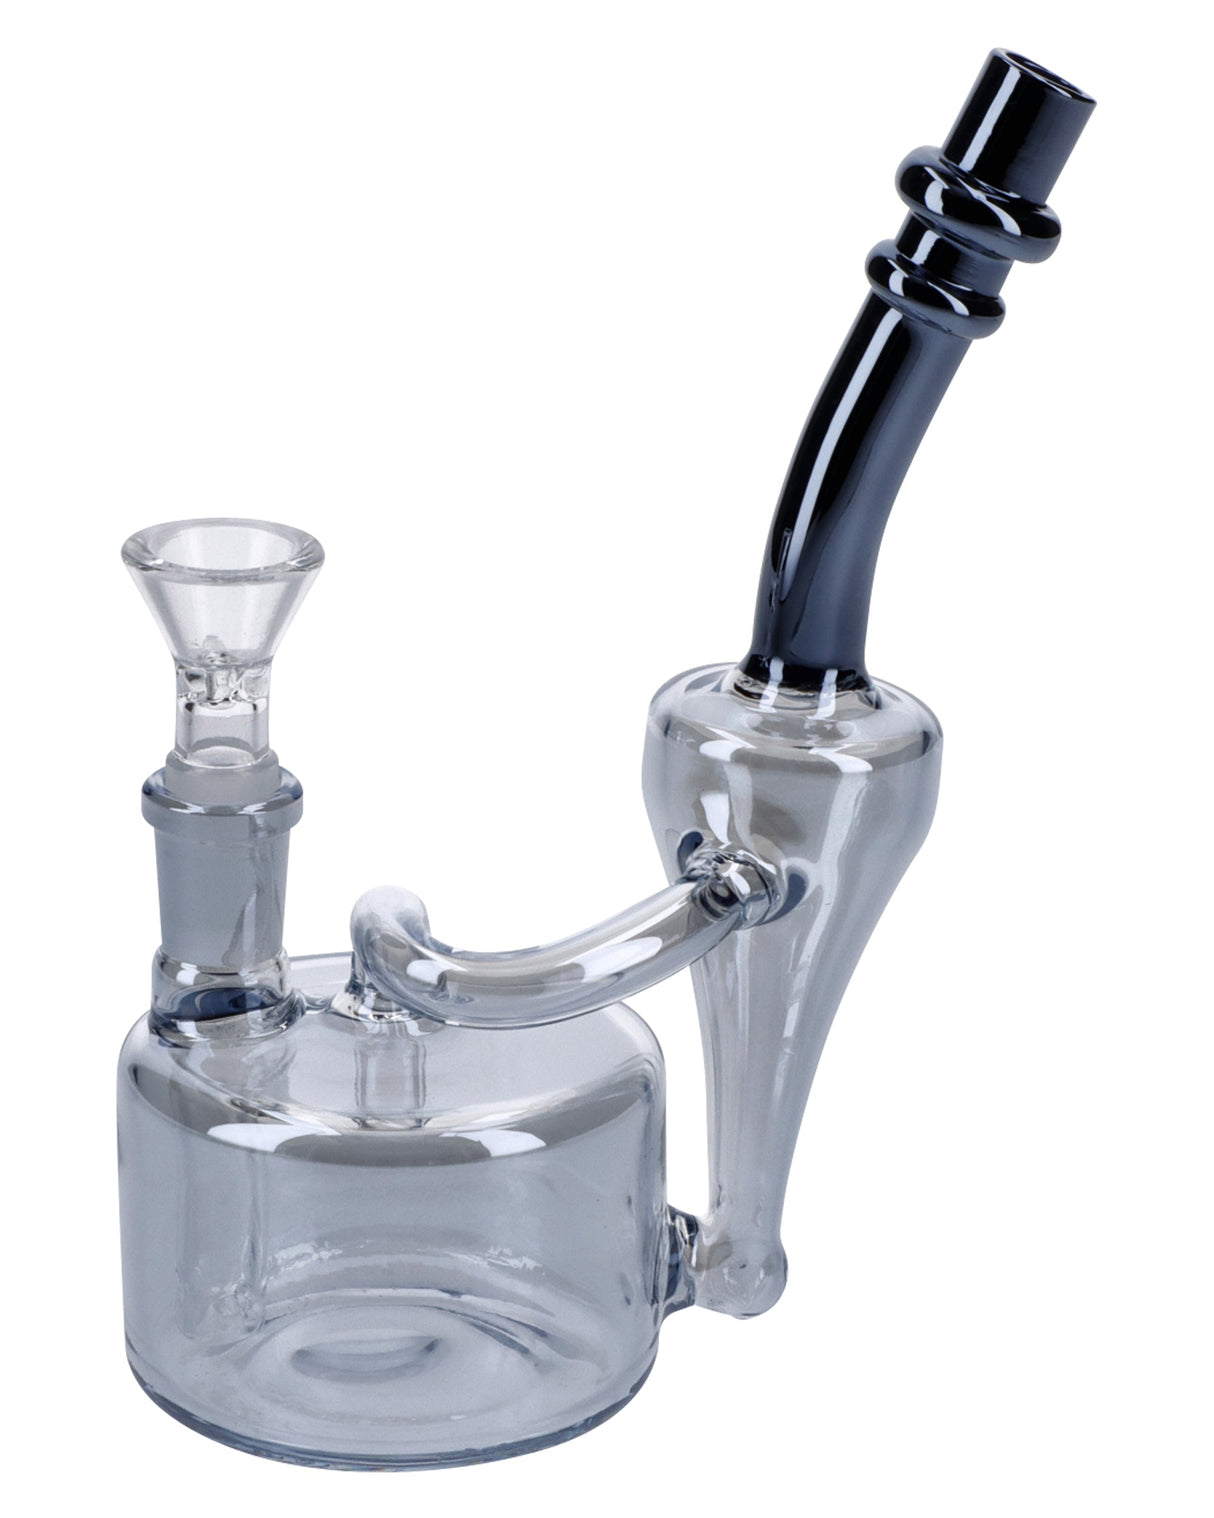 Valiant Painting Bubbler with Quartz Bowl - 6in, compact black and clear design, 90-degree joint